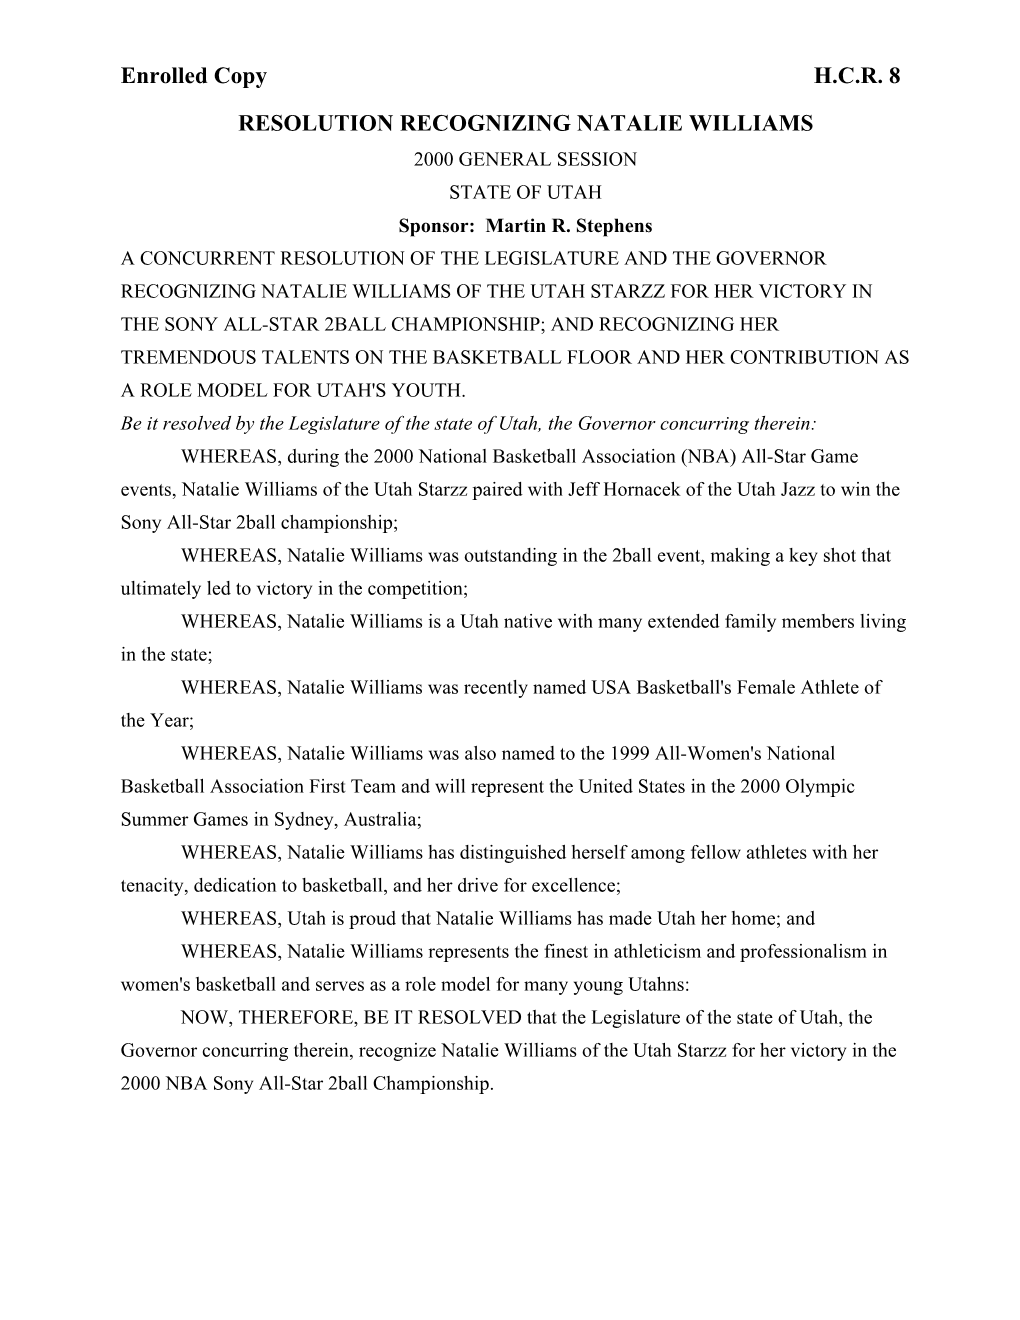 Enrolled Copy H.C.R. 8 RESOLUTION RECOGNIZING NATALIE WILLIAMS